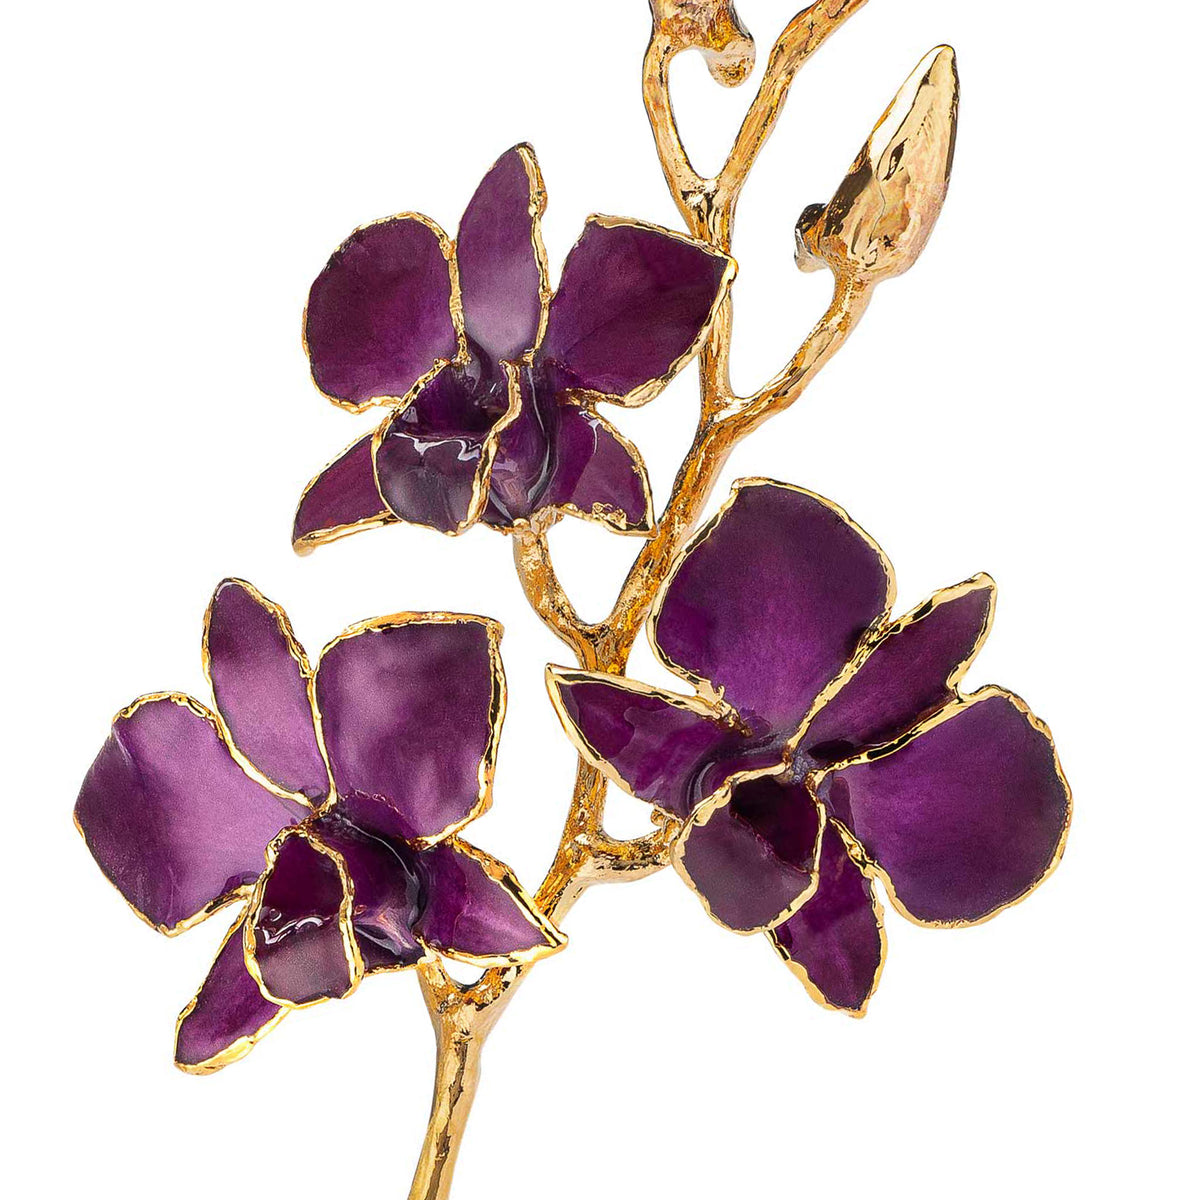 24K Gold Dipped Orchid in Purple view of gold stem and flowers closeup view